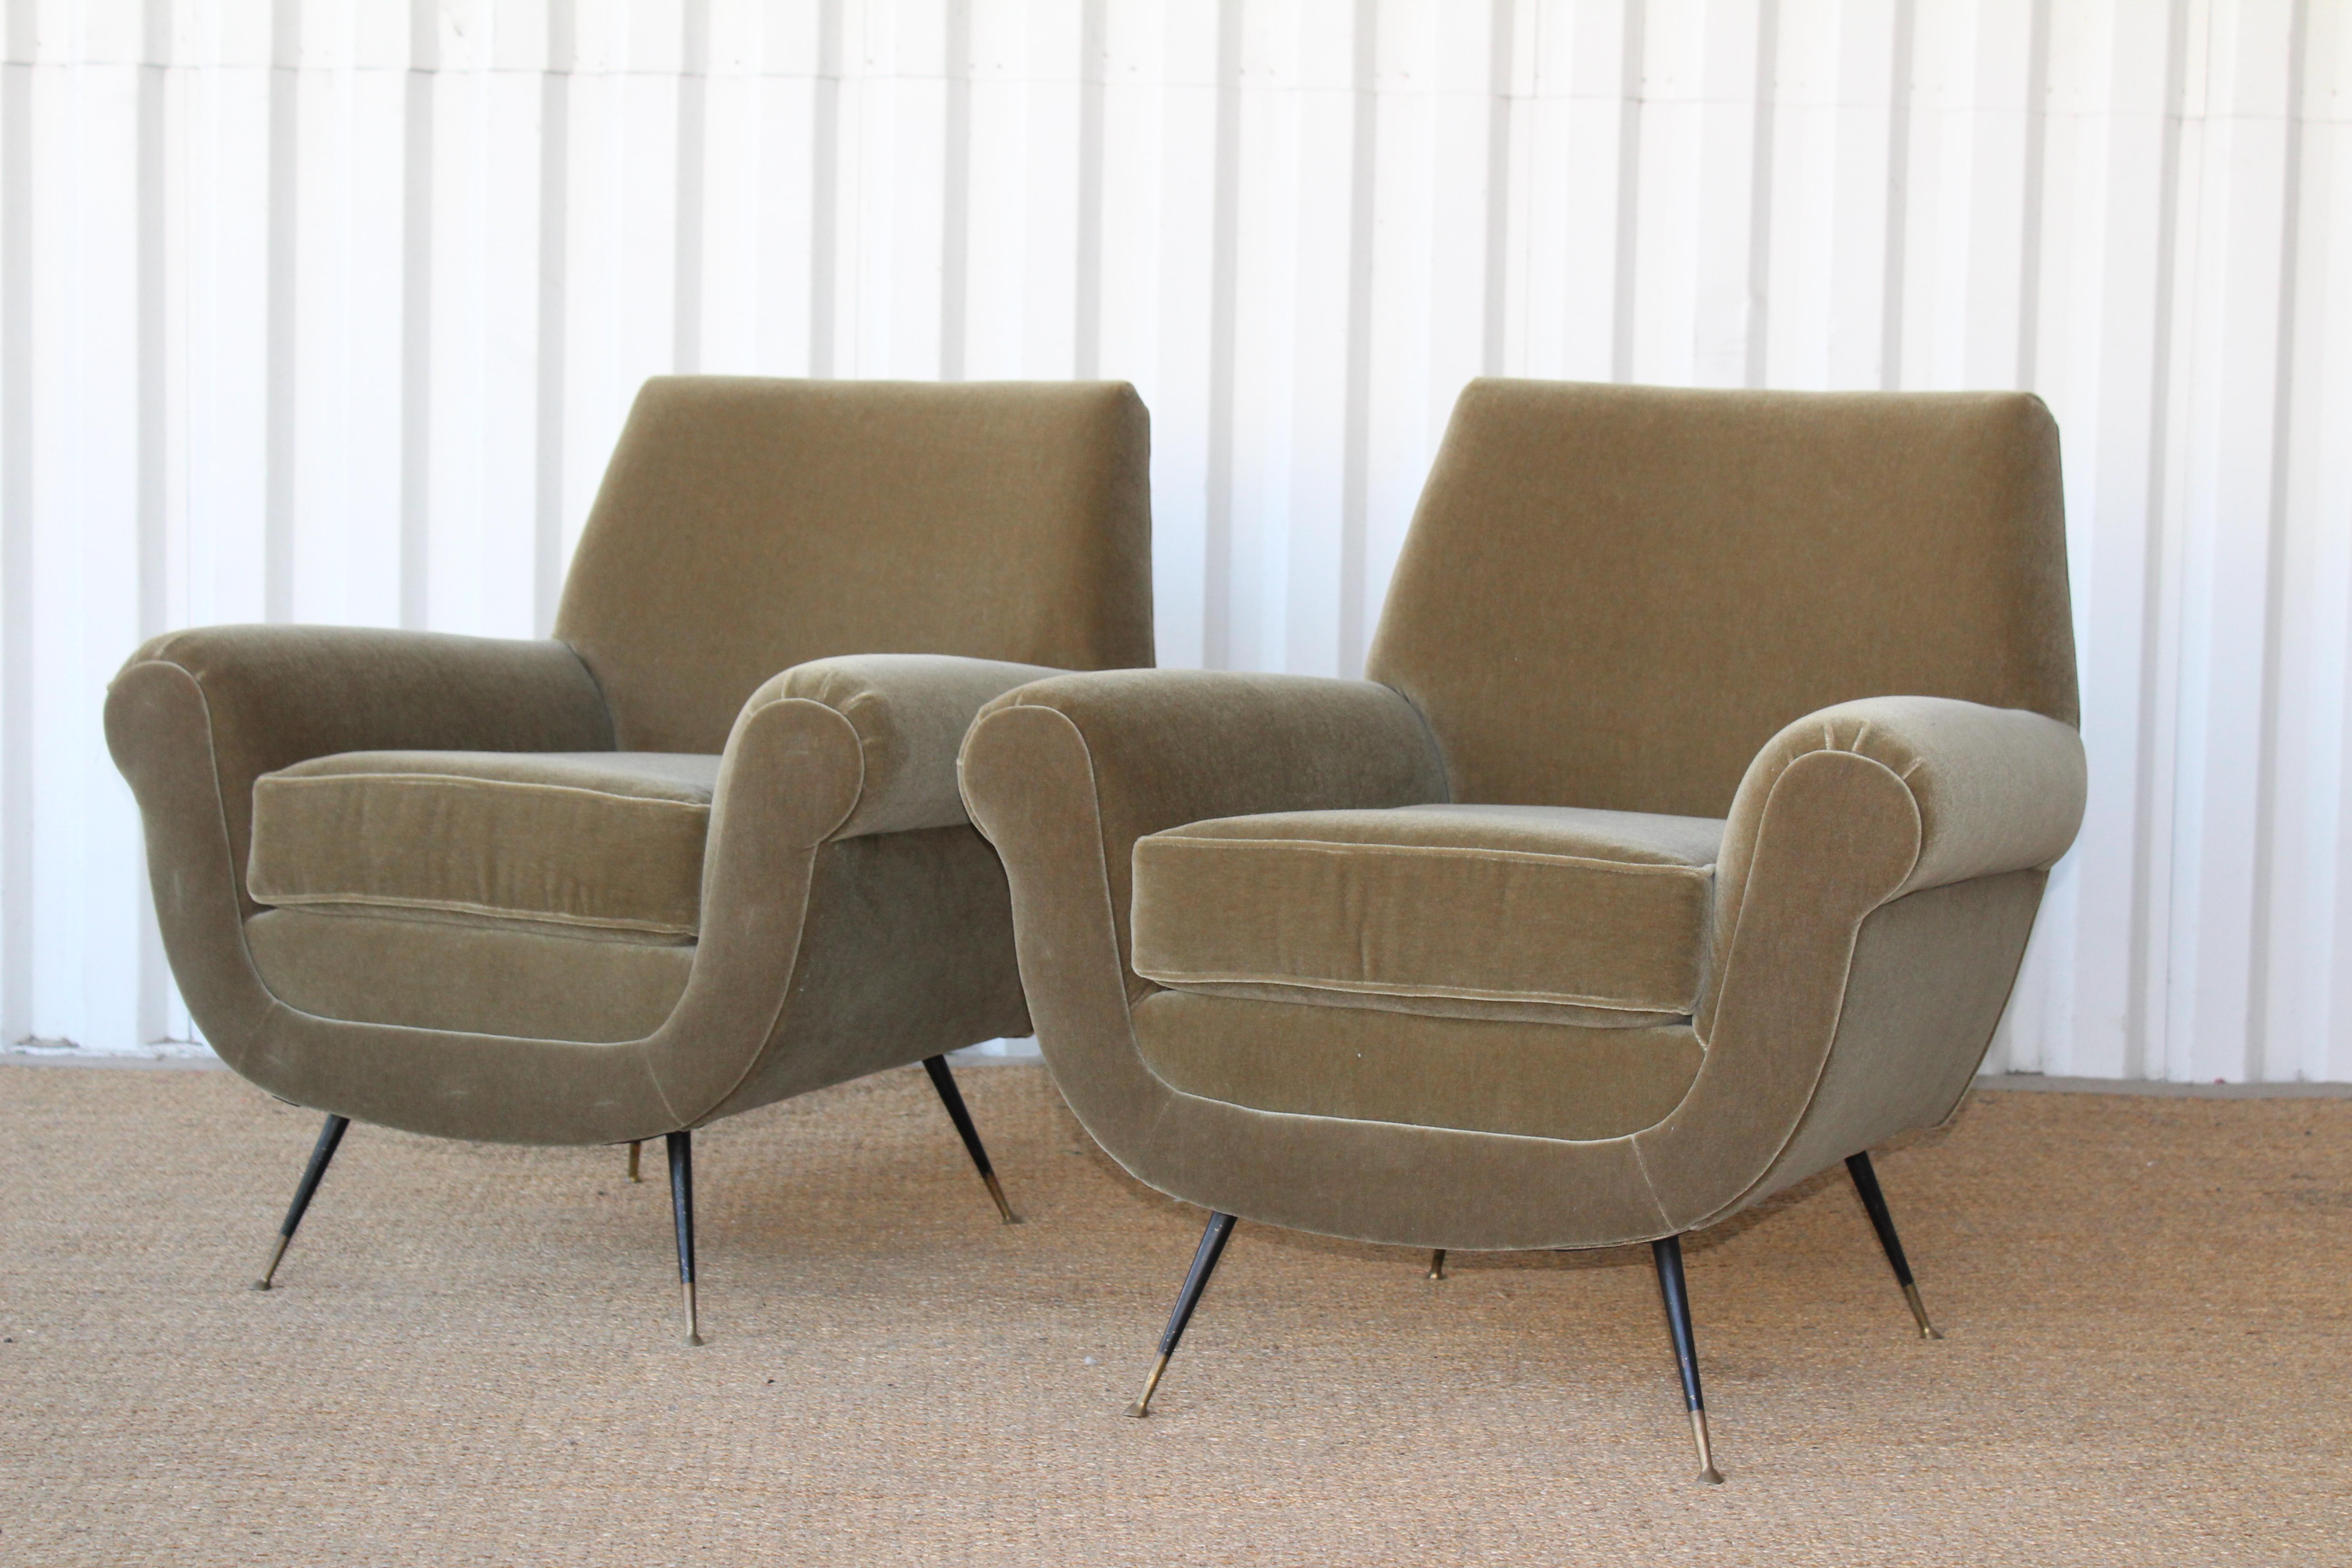 Mid-20th Century Pair of Lounge Chairs by Gigi Radice for Minotti, Italy, 1950s